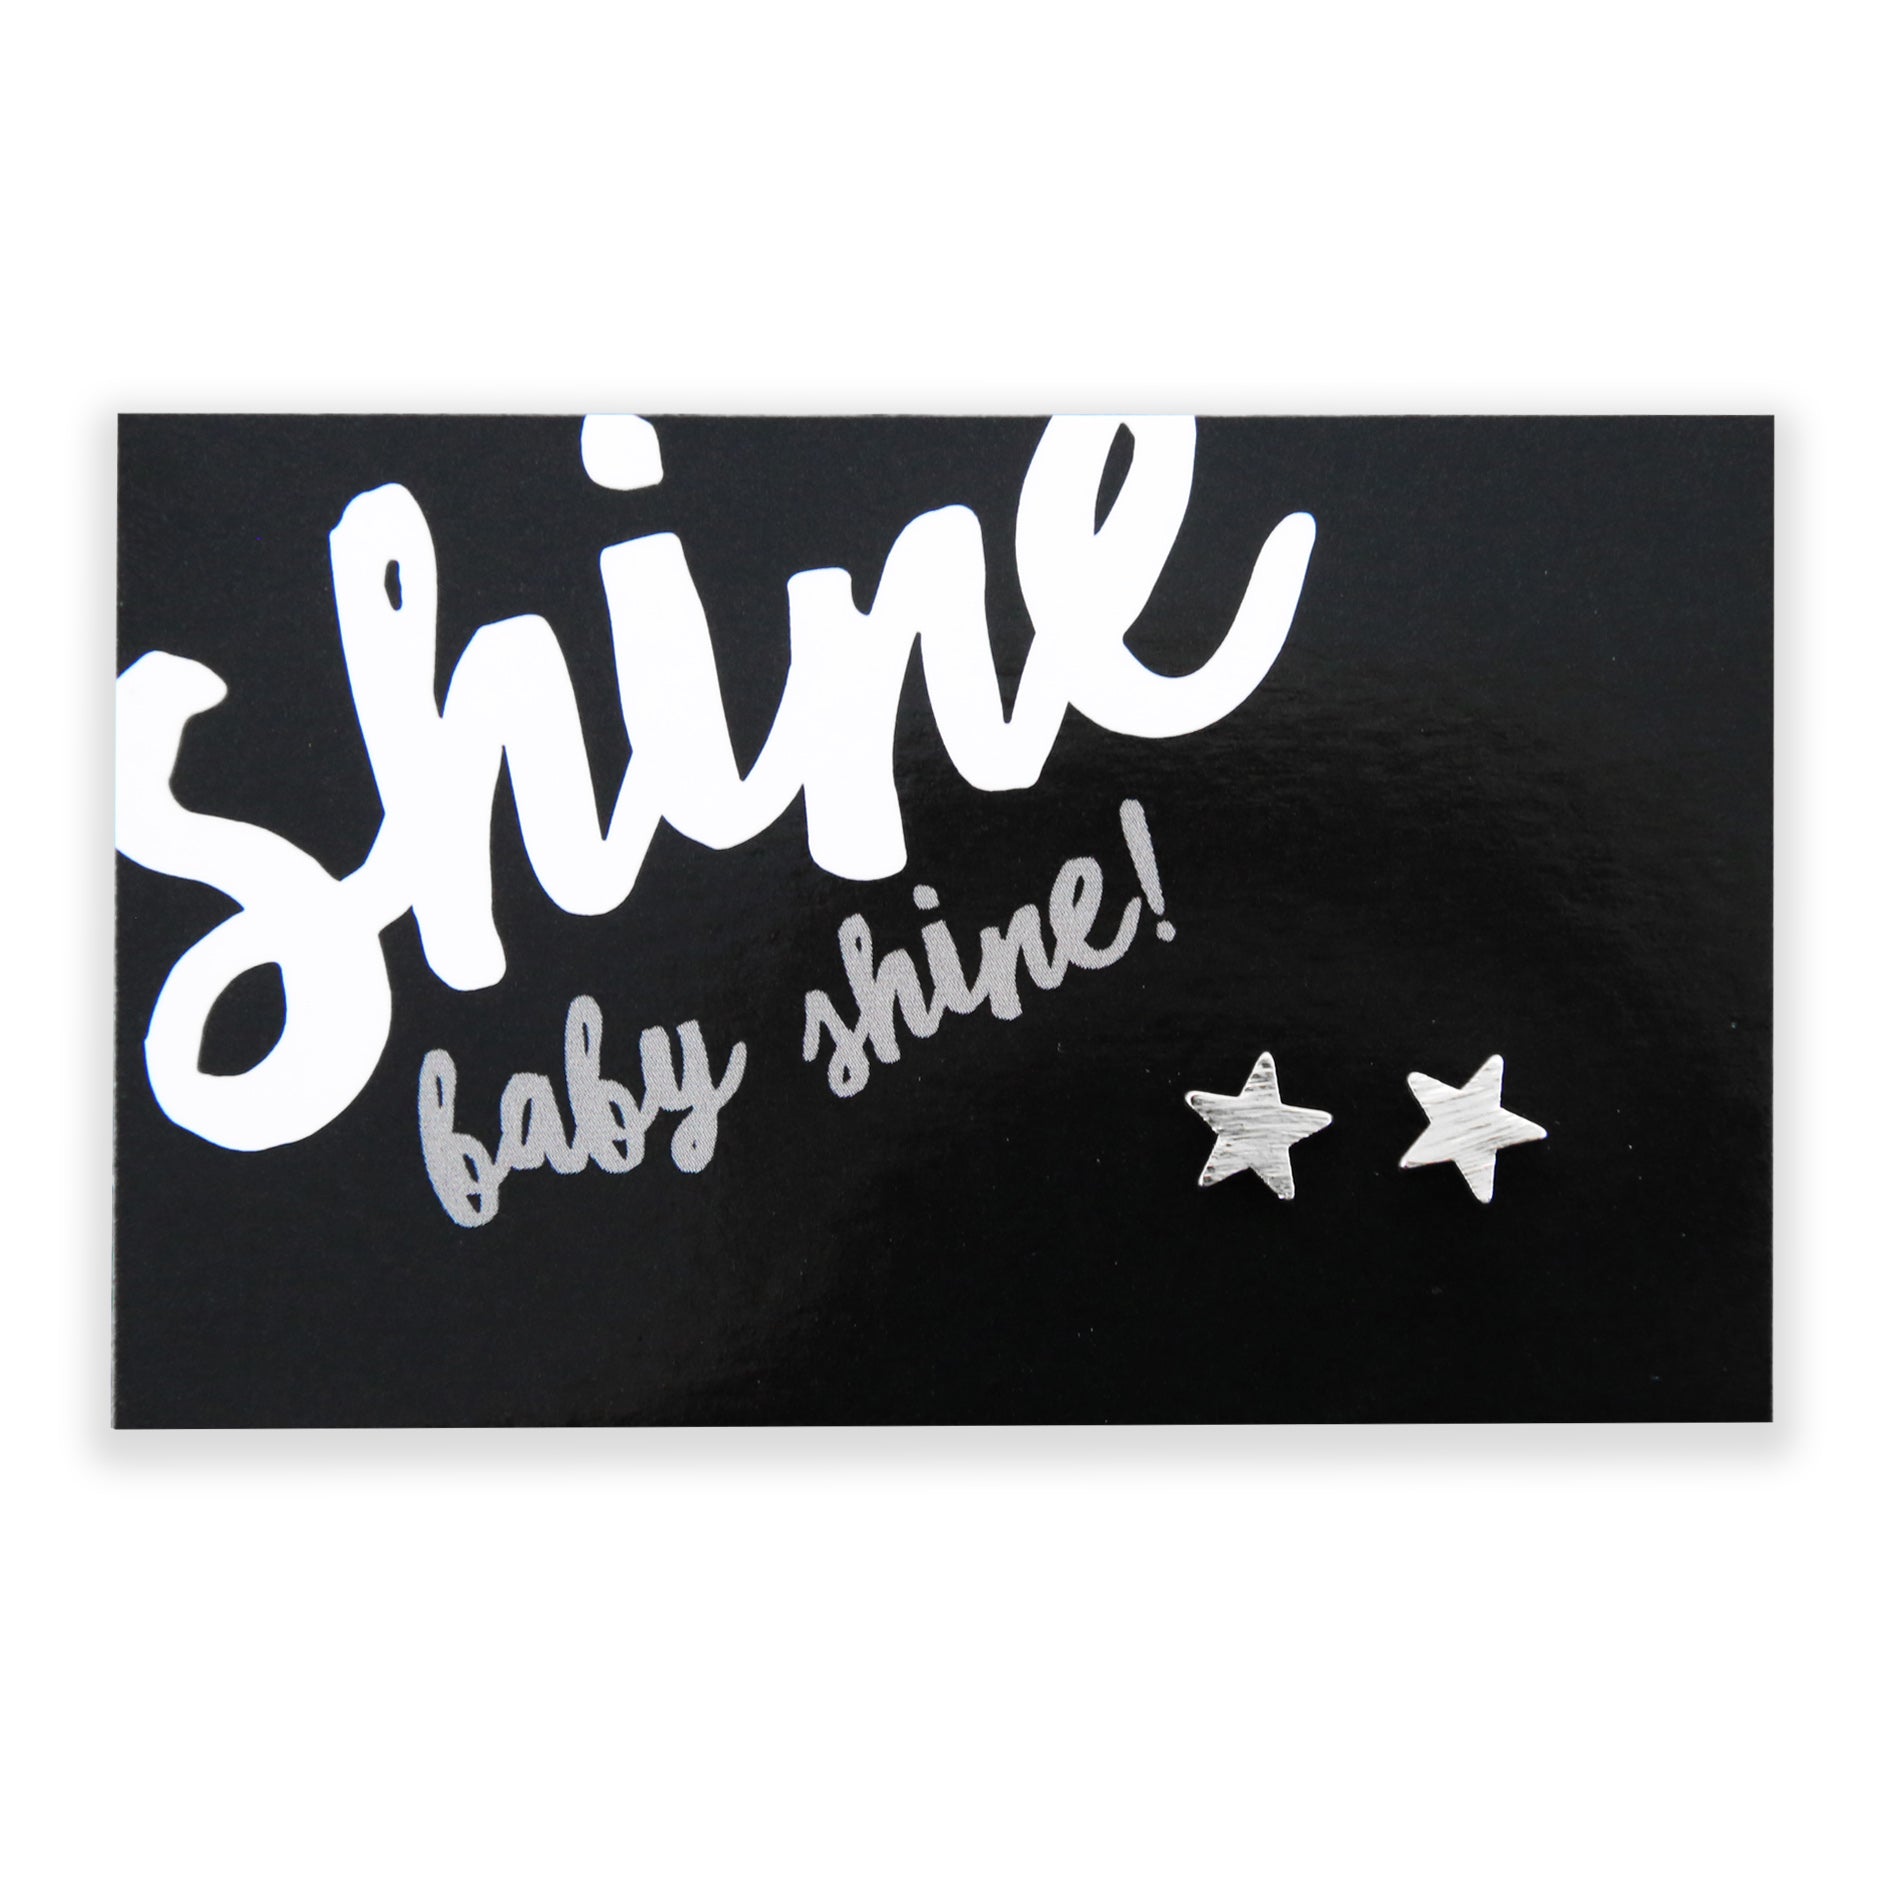 Shine Baby Shine! Brushed Look Star Studs - Silver (9412)